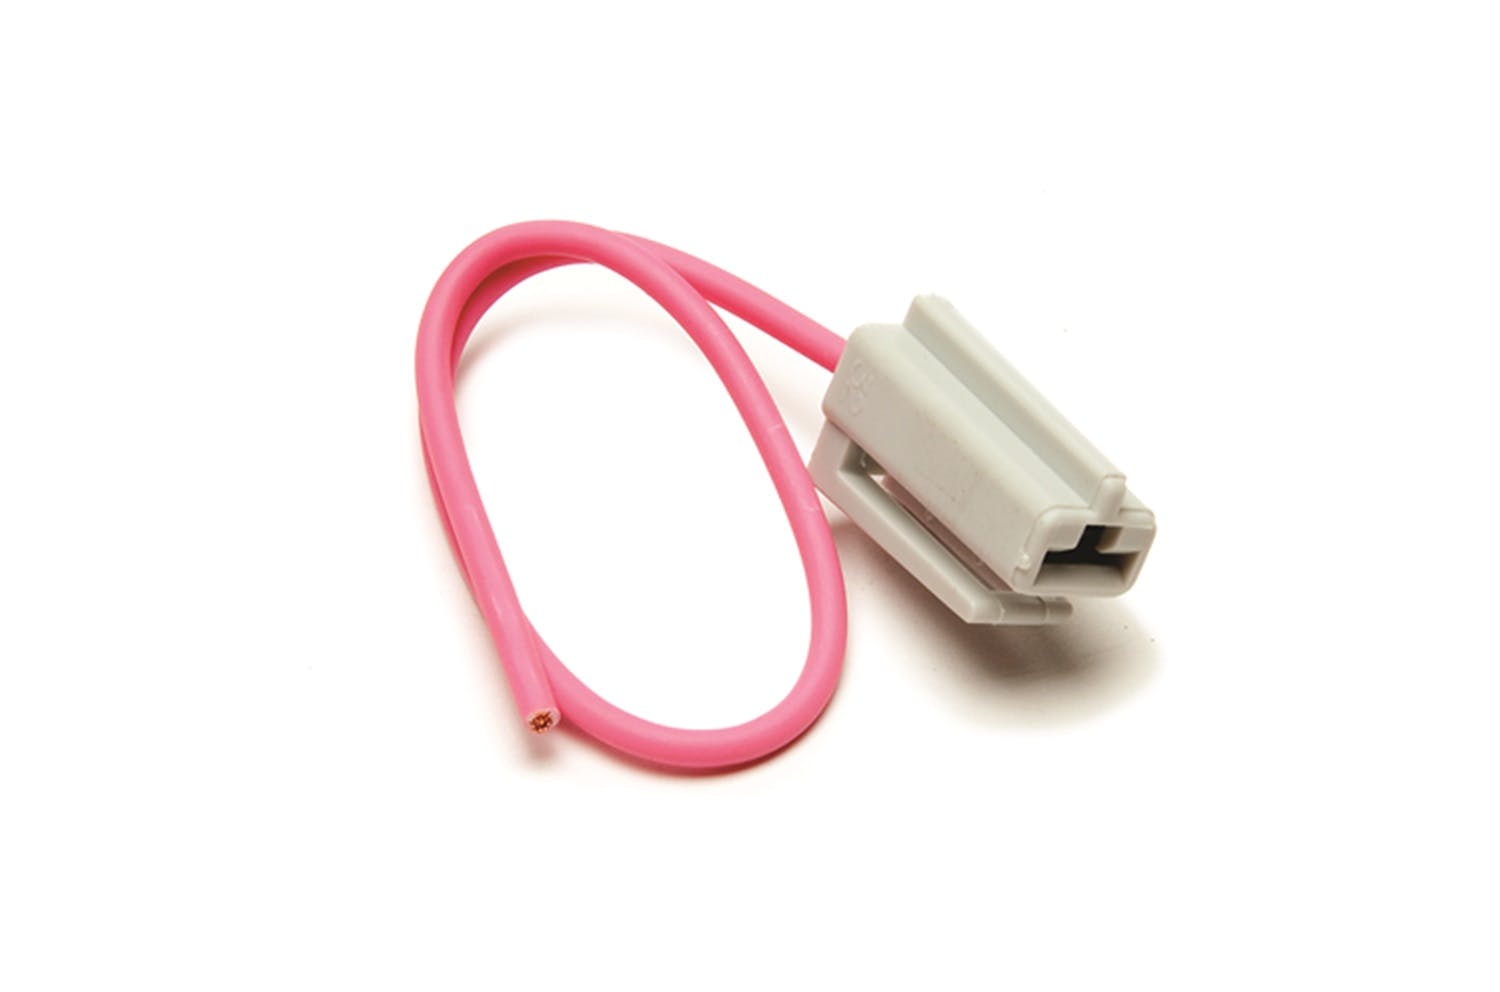 Painless 30809 HEI Power Lead Pigtail